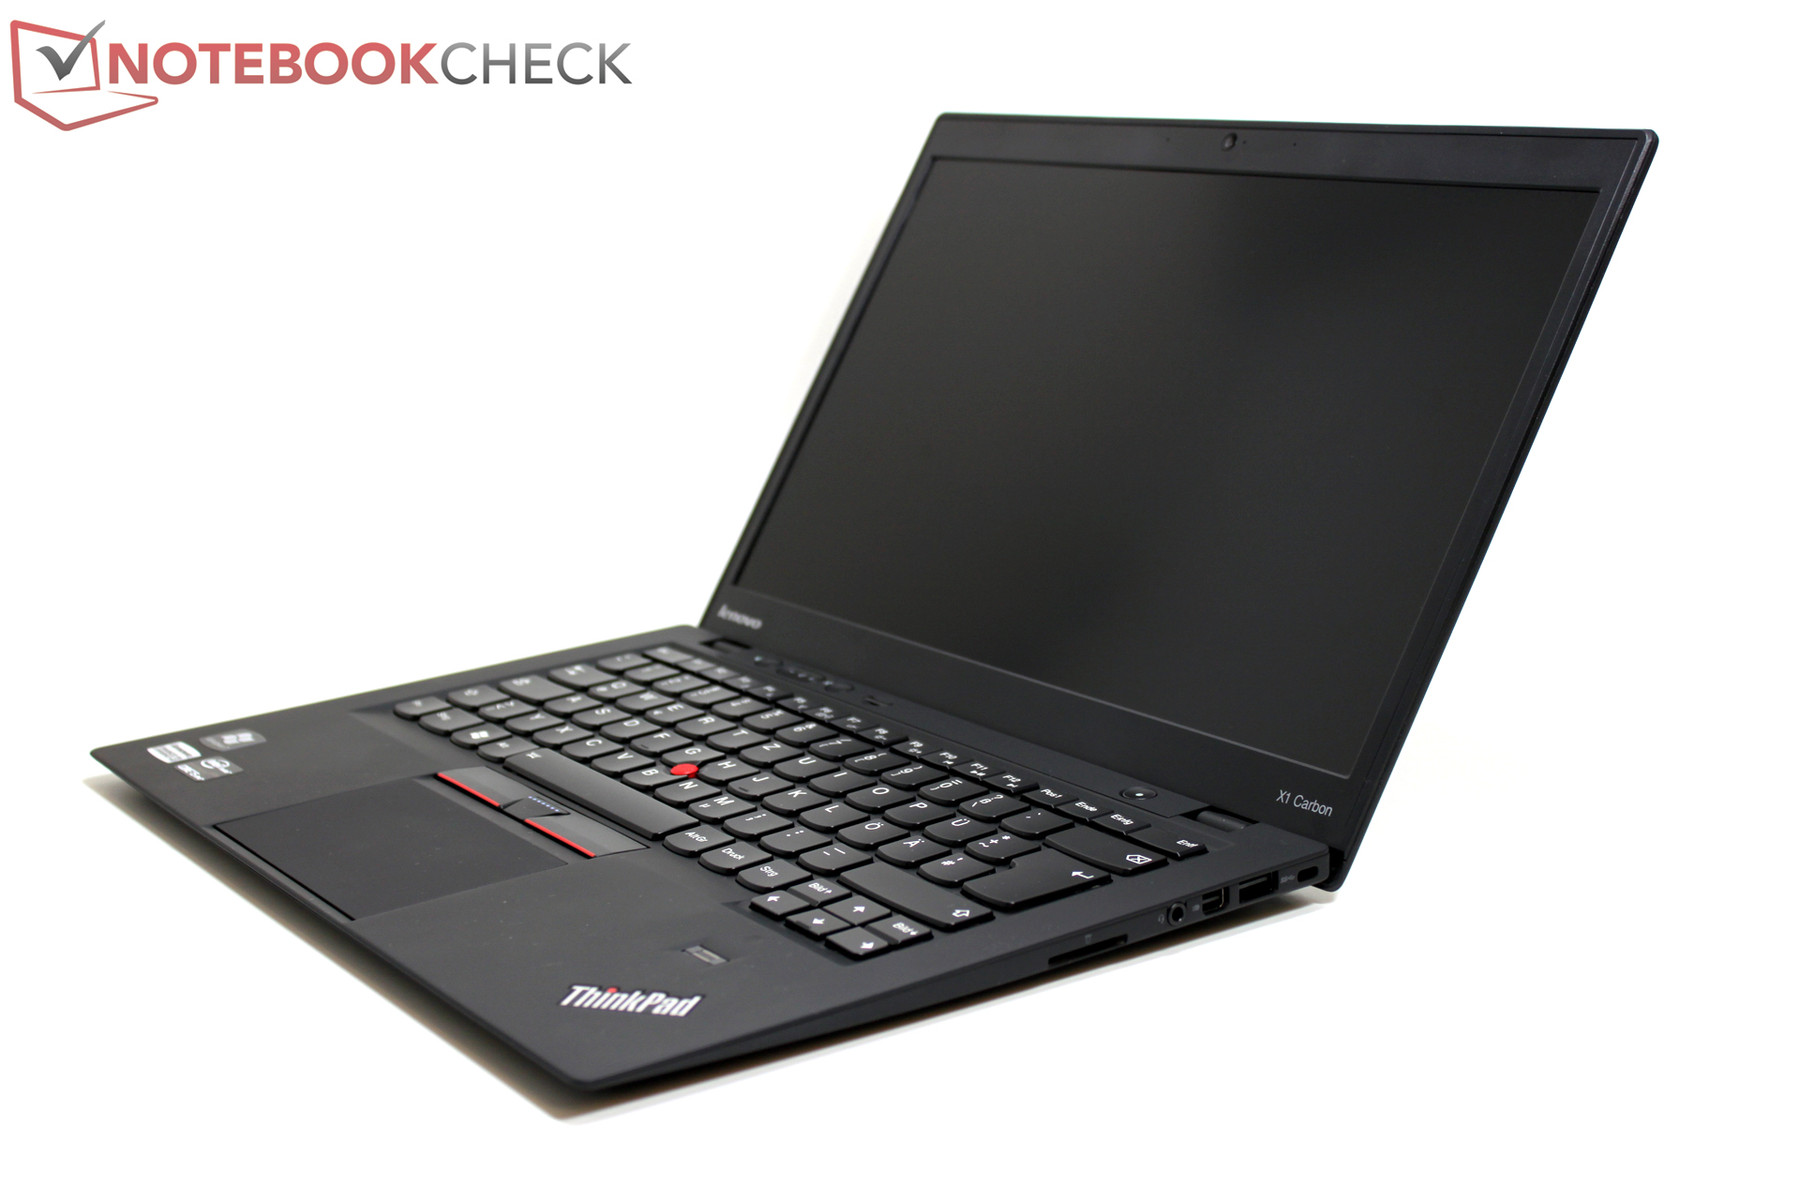 Review Update Lenovo ThinkPad X1 Carbon Ultrabook - NotebookCheck 